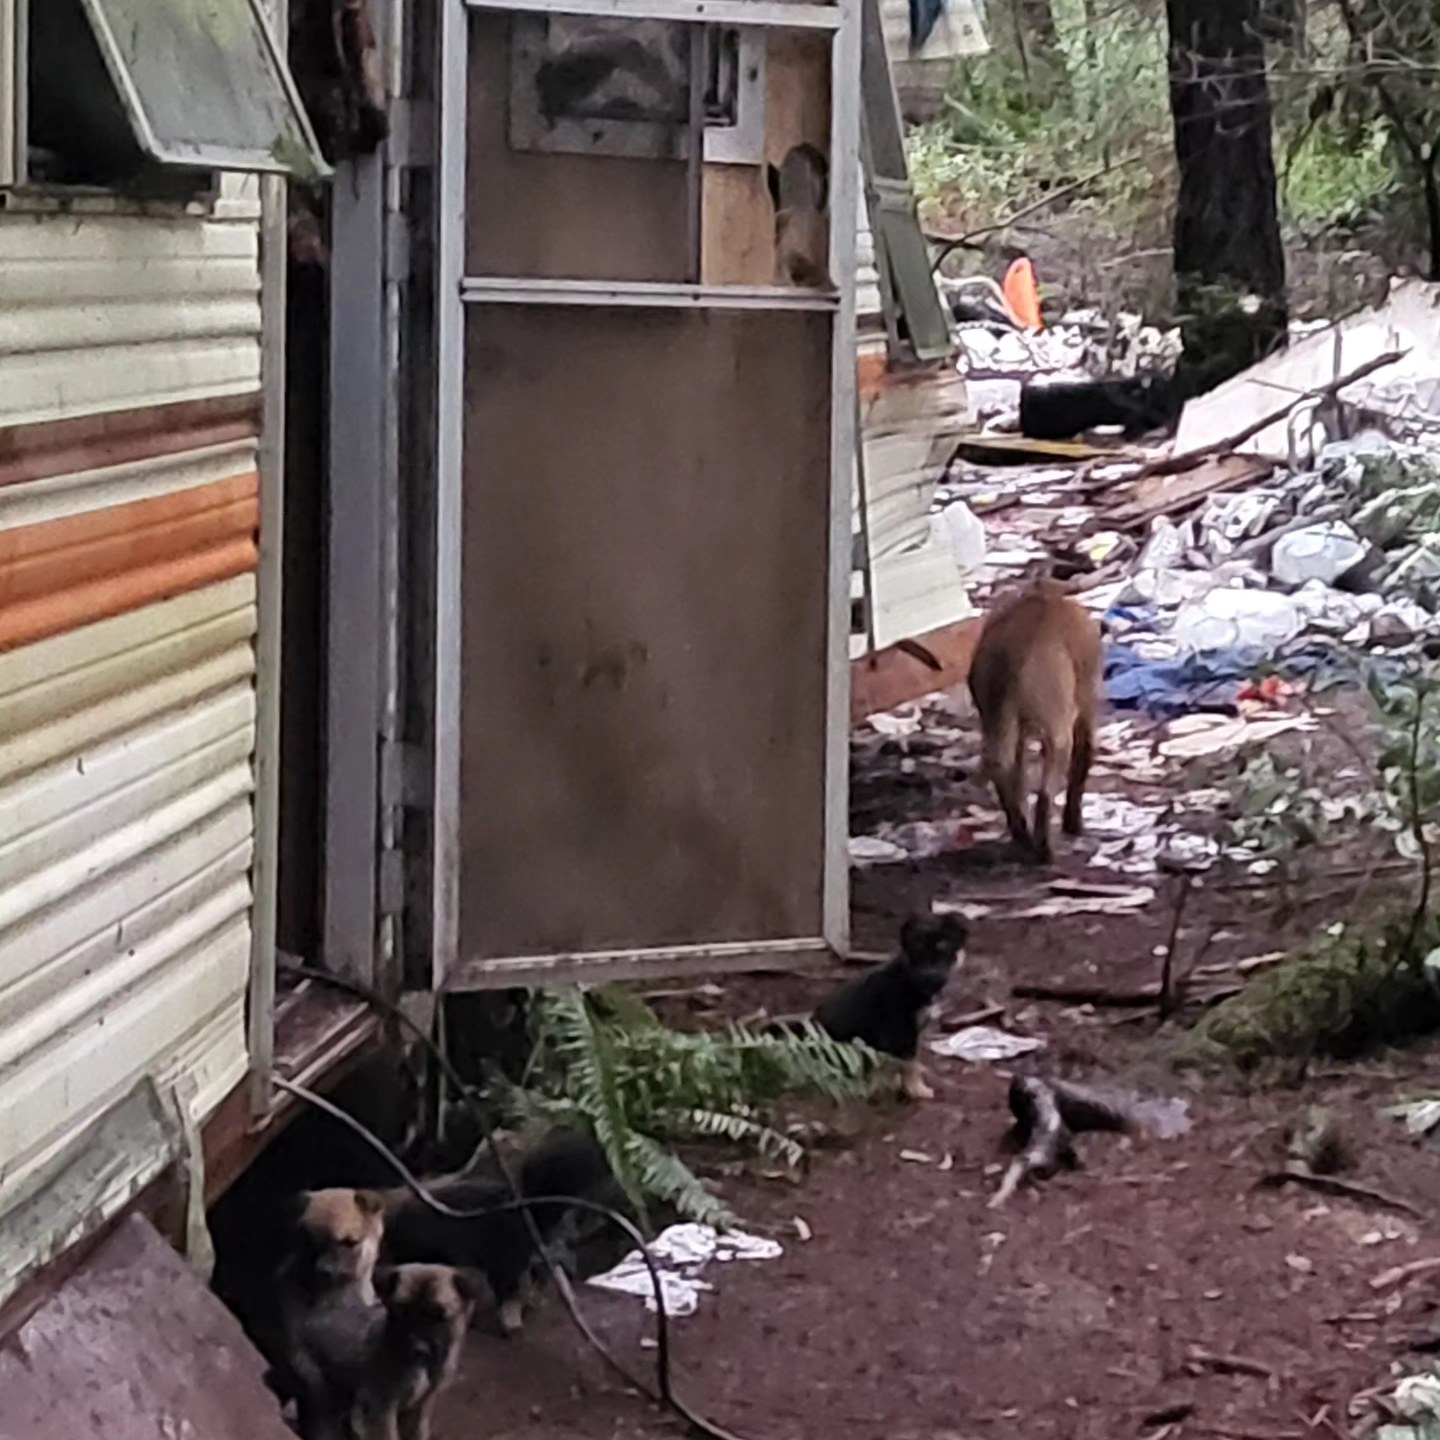 abandoned trailer and puppies in front of it